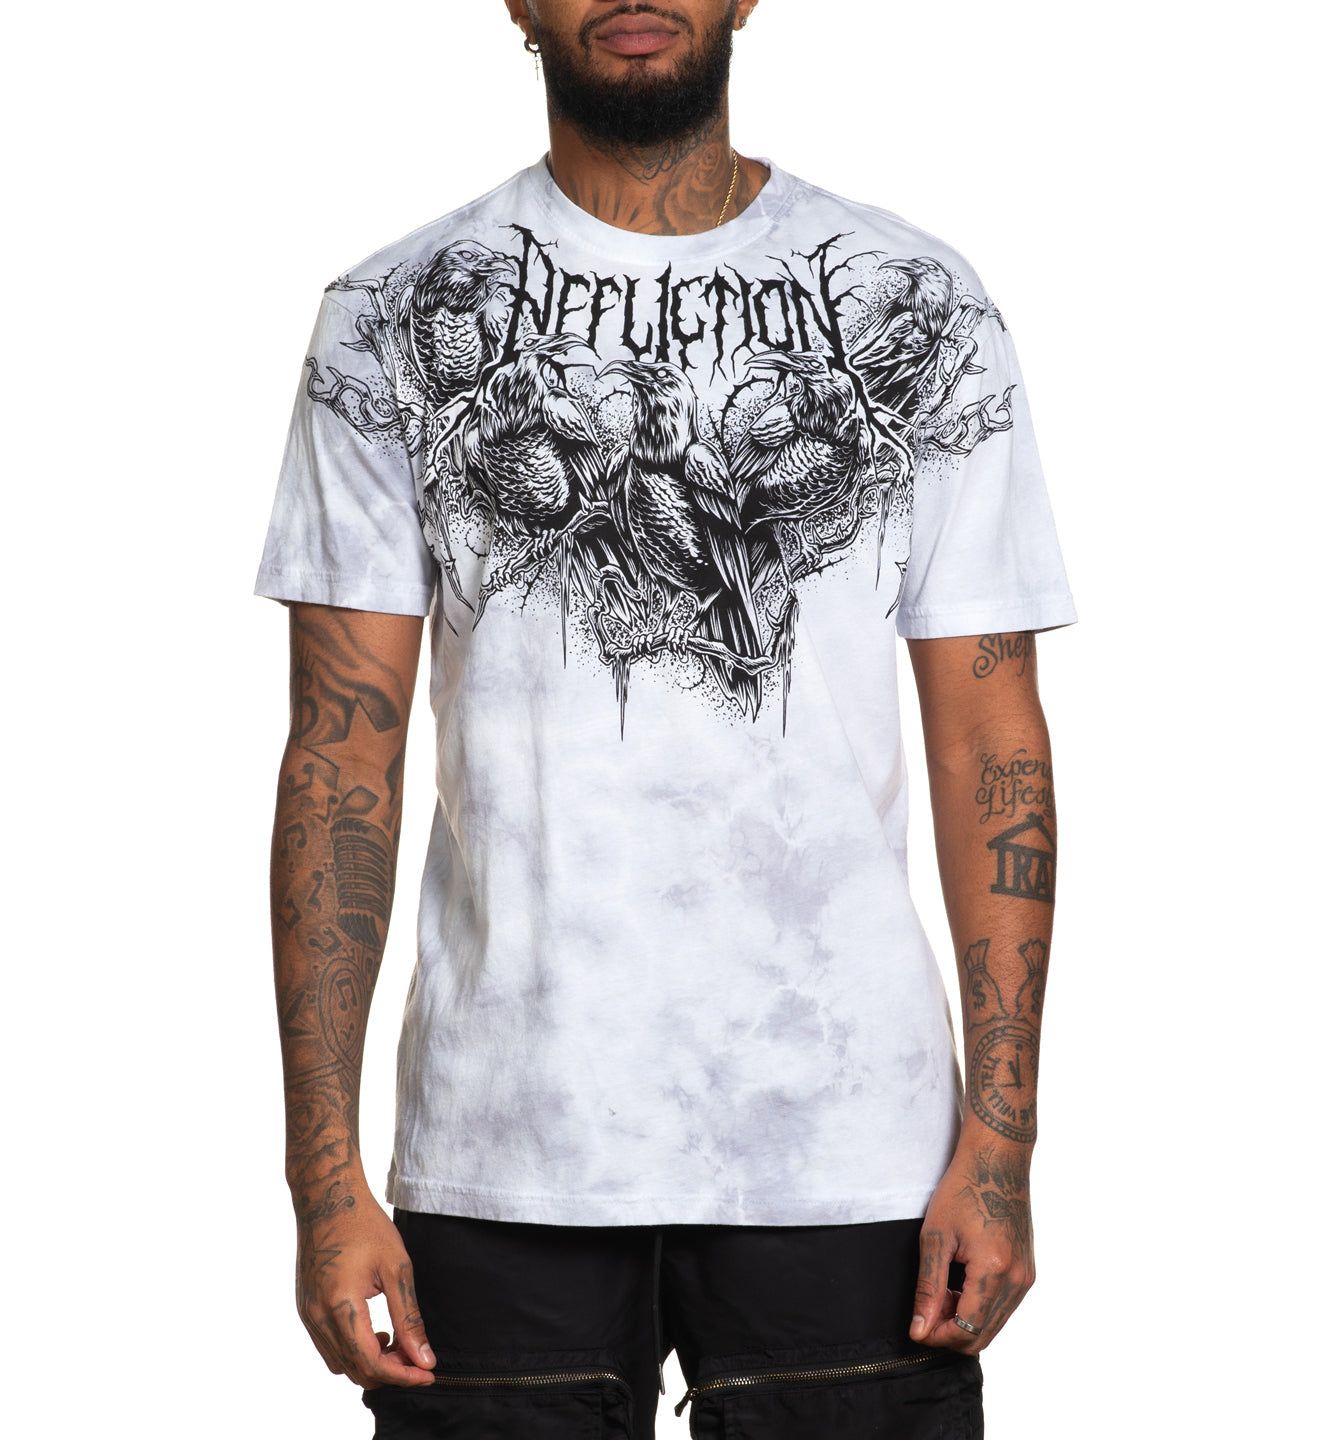 Mystery - Affliction Clothing